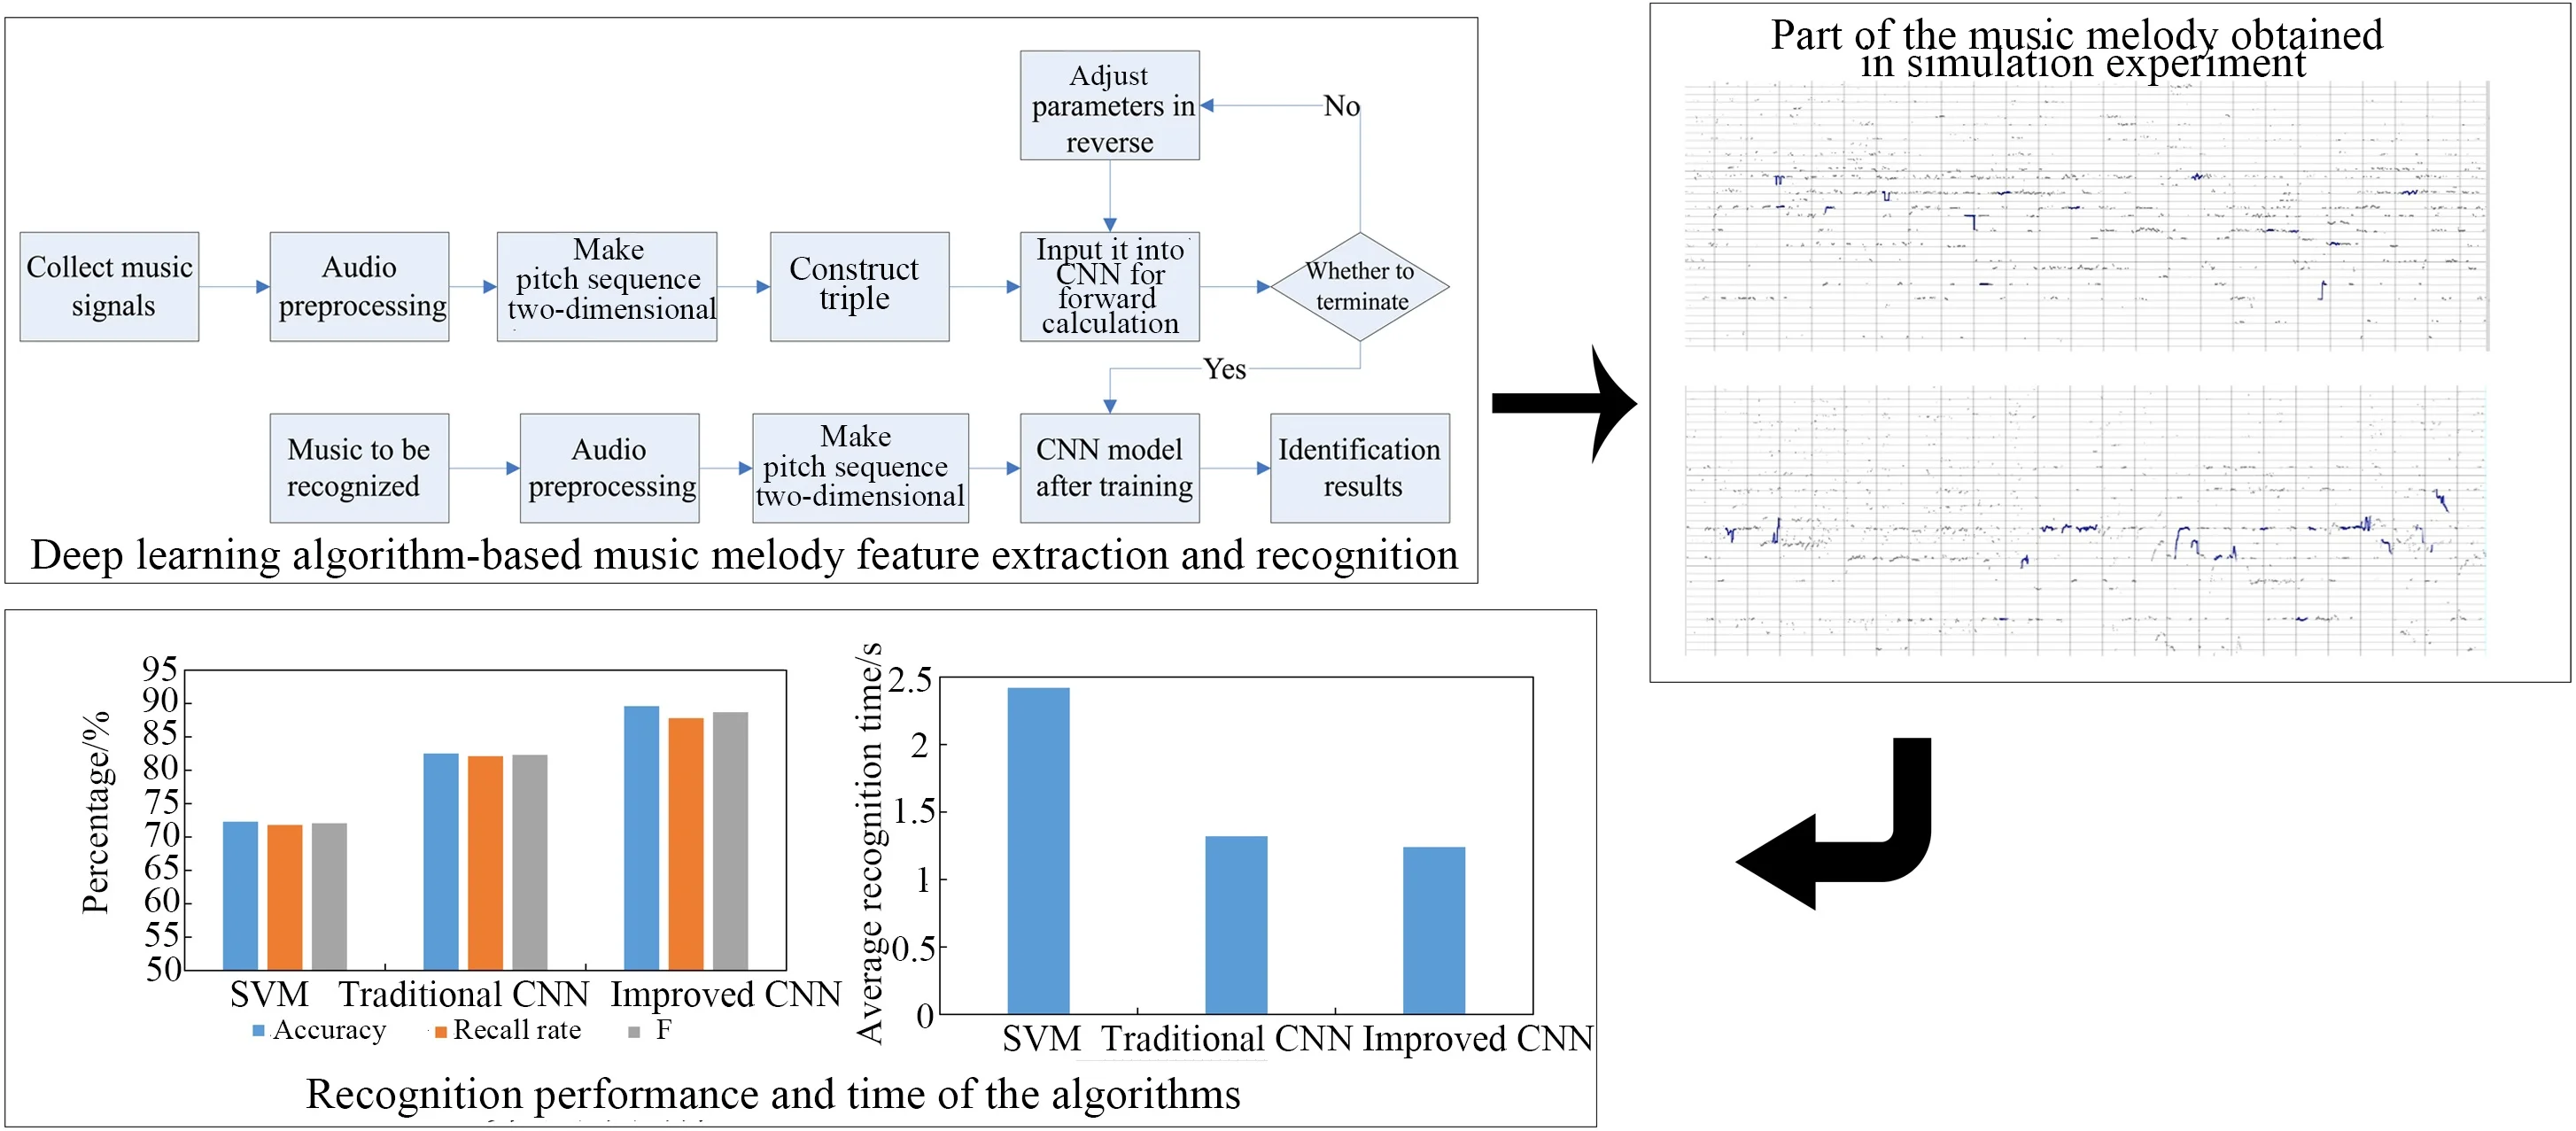 Extraction and recognition of music melody features using a deep neural network